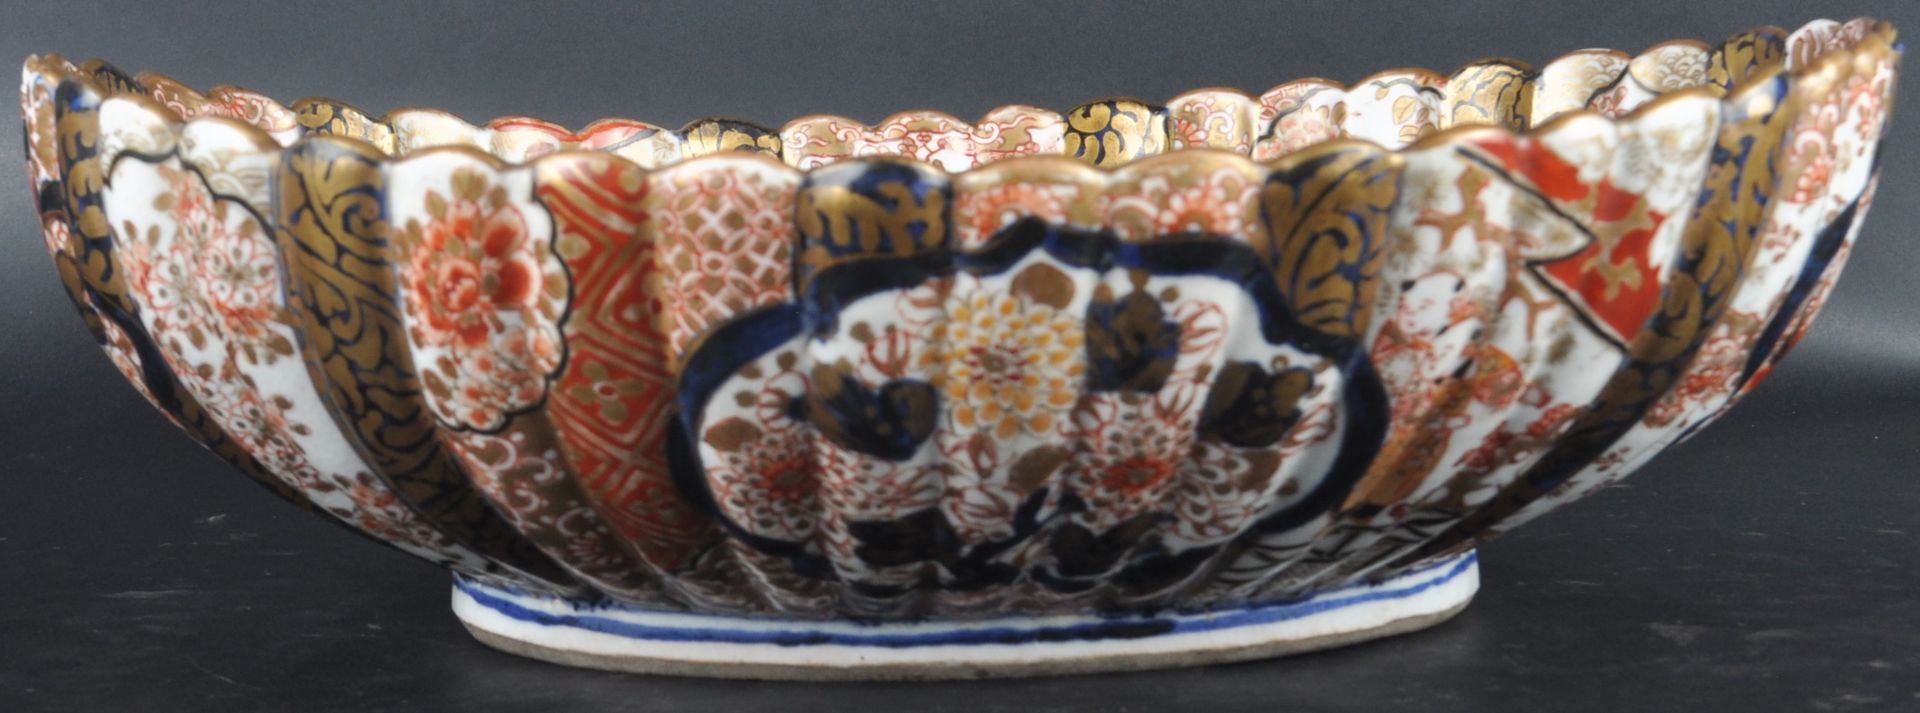 19TH CENTURY JAPANESE MEIJI PERIOD SEGMENTED CHARGER - Image 2 of 7